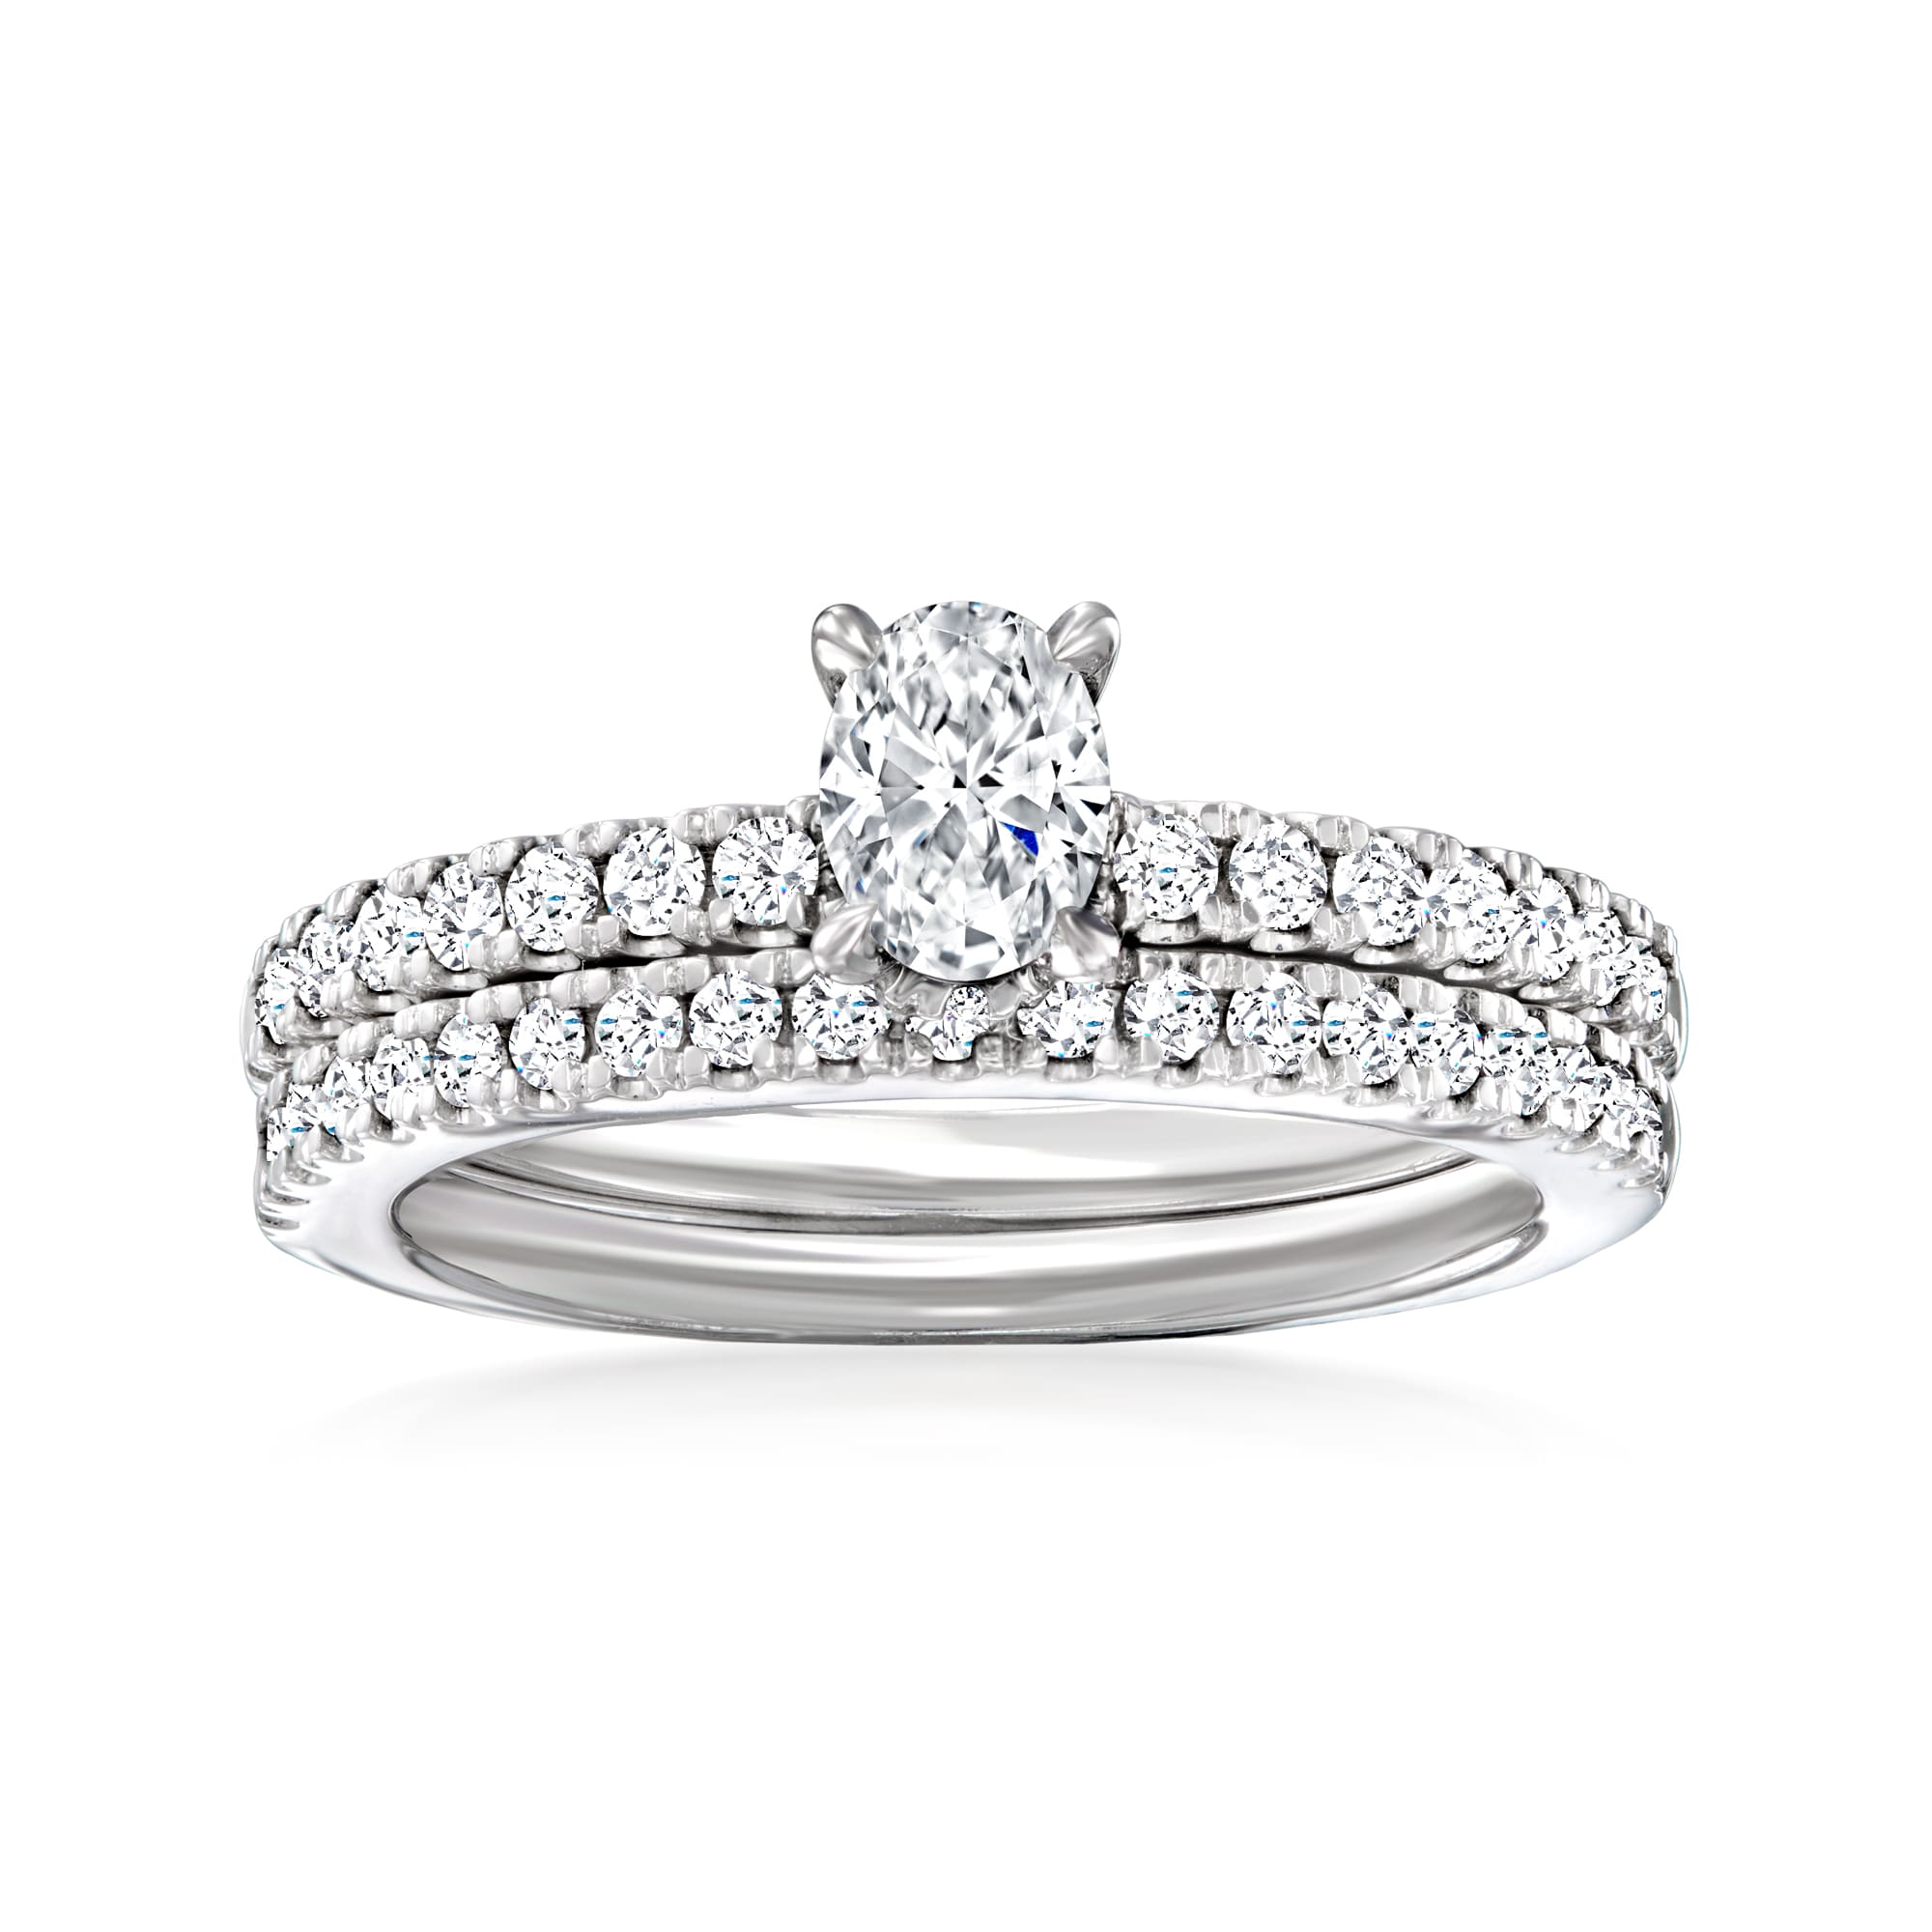 1.00 ct. t.w. Diamond Bridal Set: Engagement and Wedding Rings in